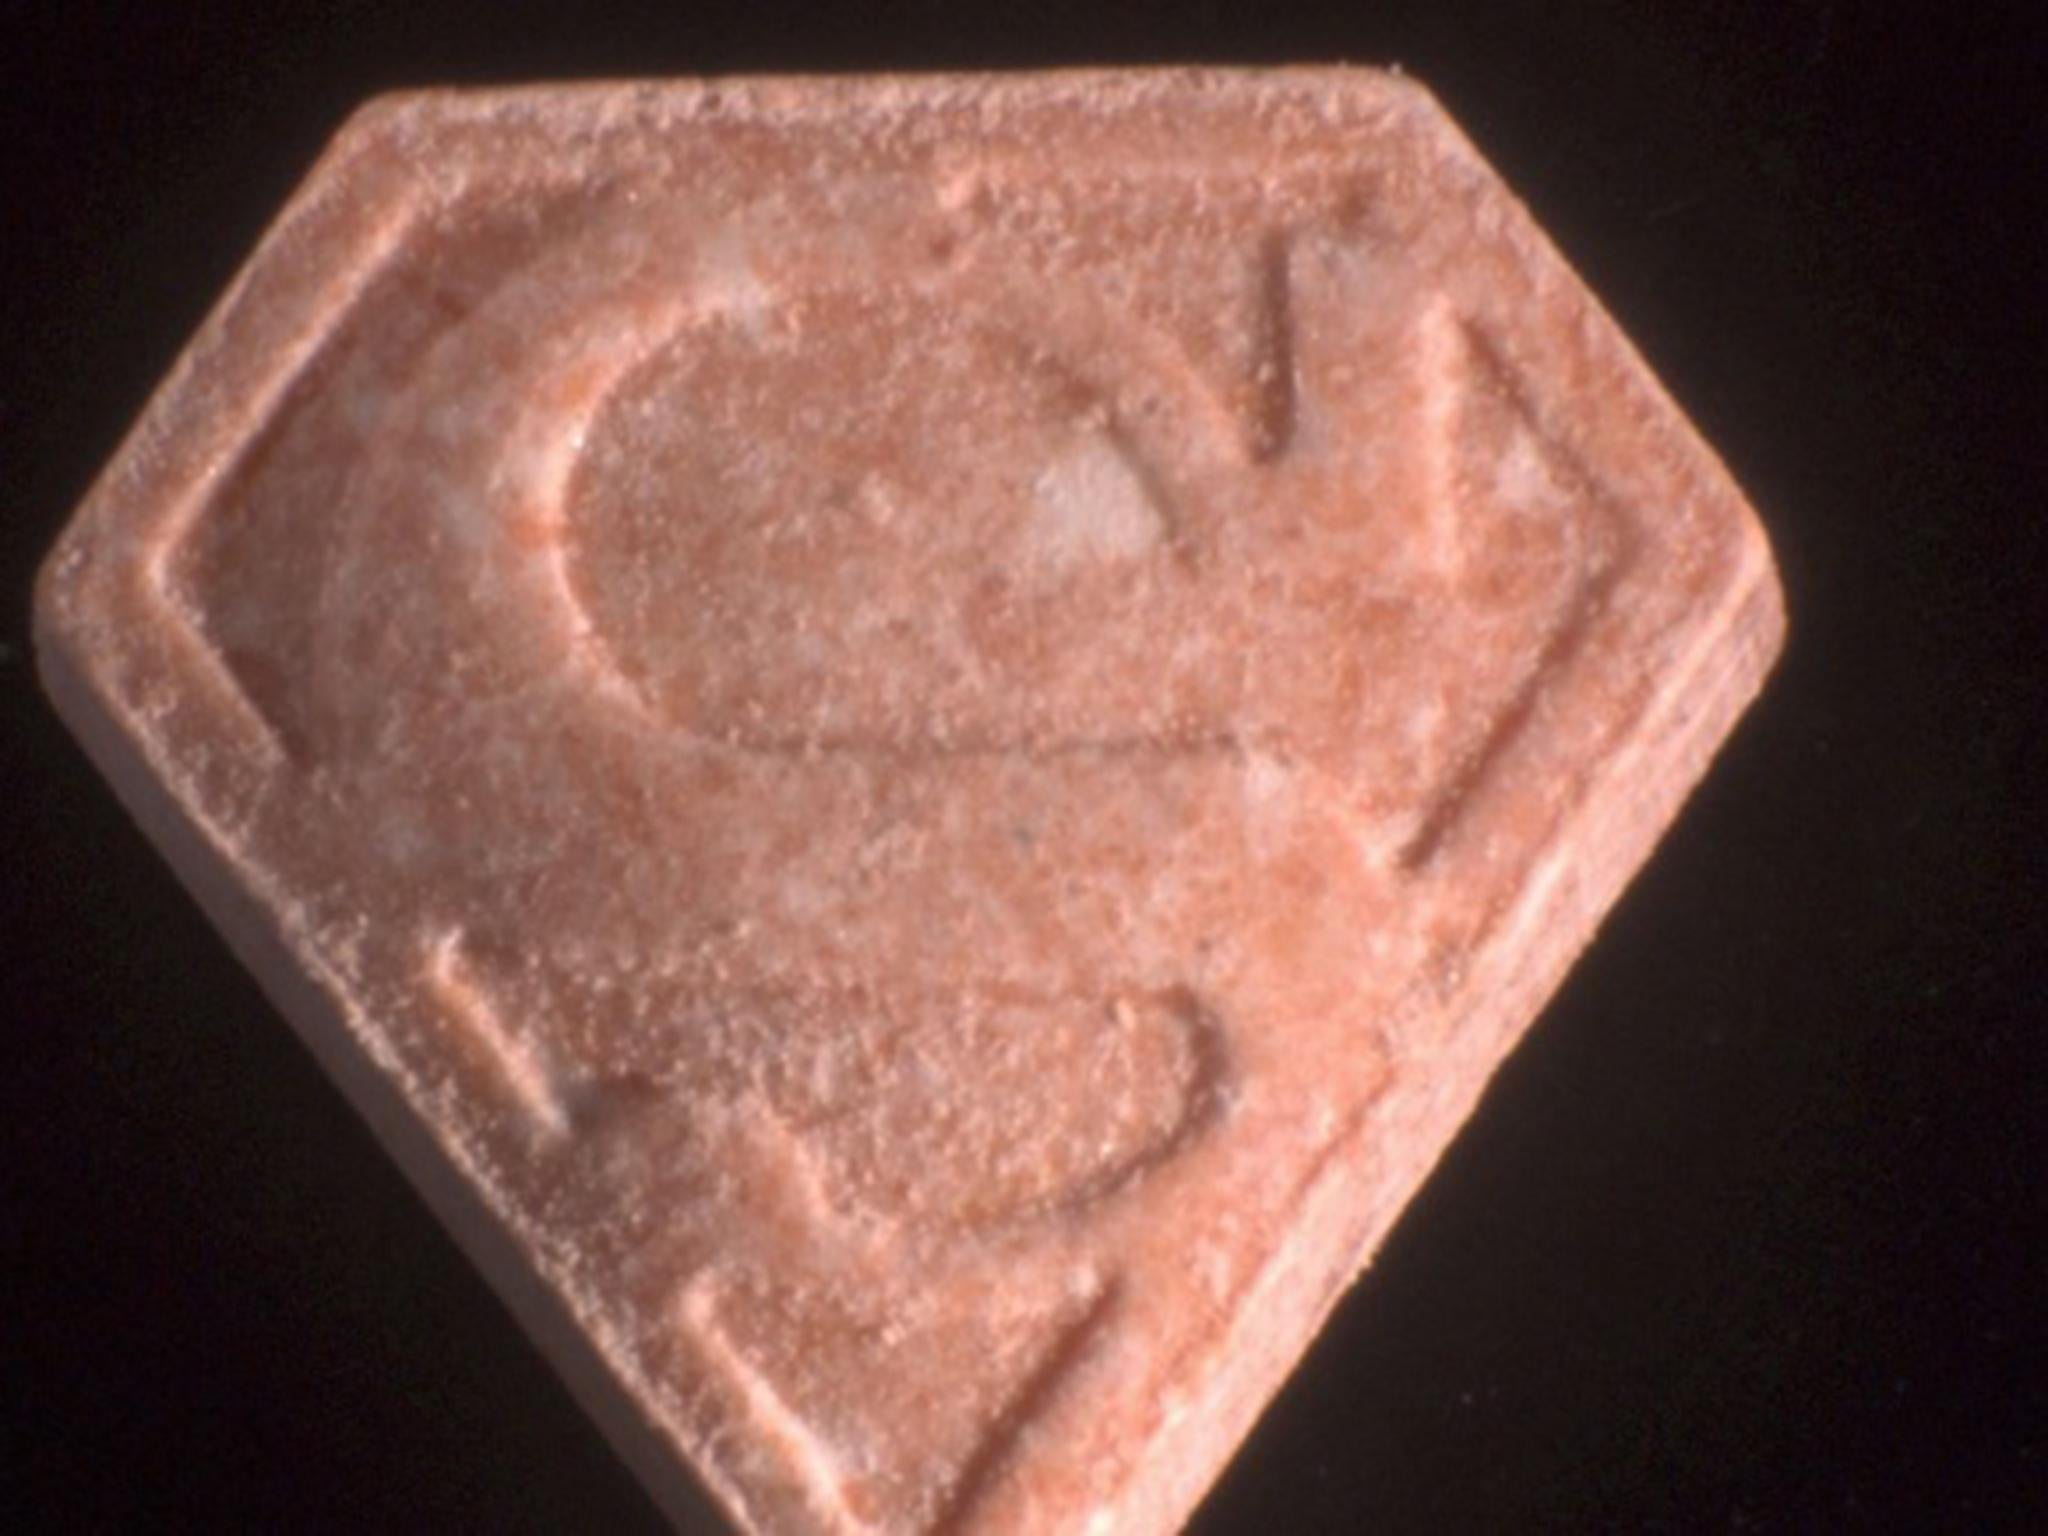 Superman PMMA ecstasy pill prompts red alert in Netherlands The Independent The Independent pic